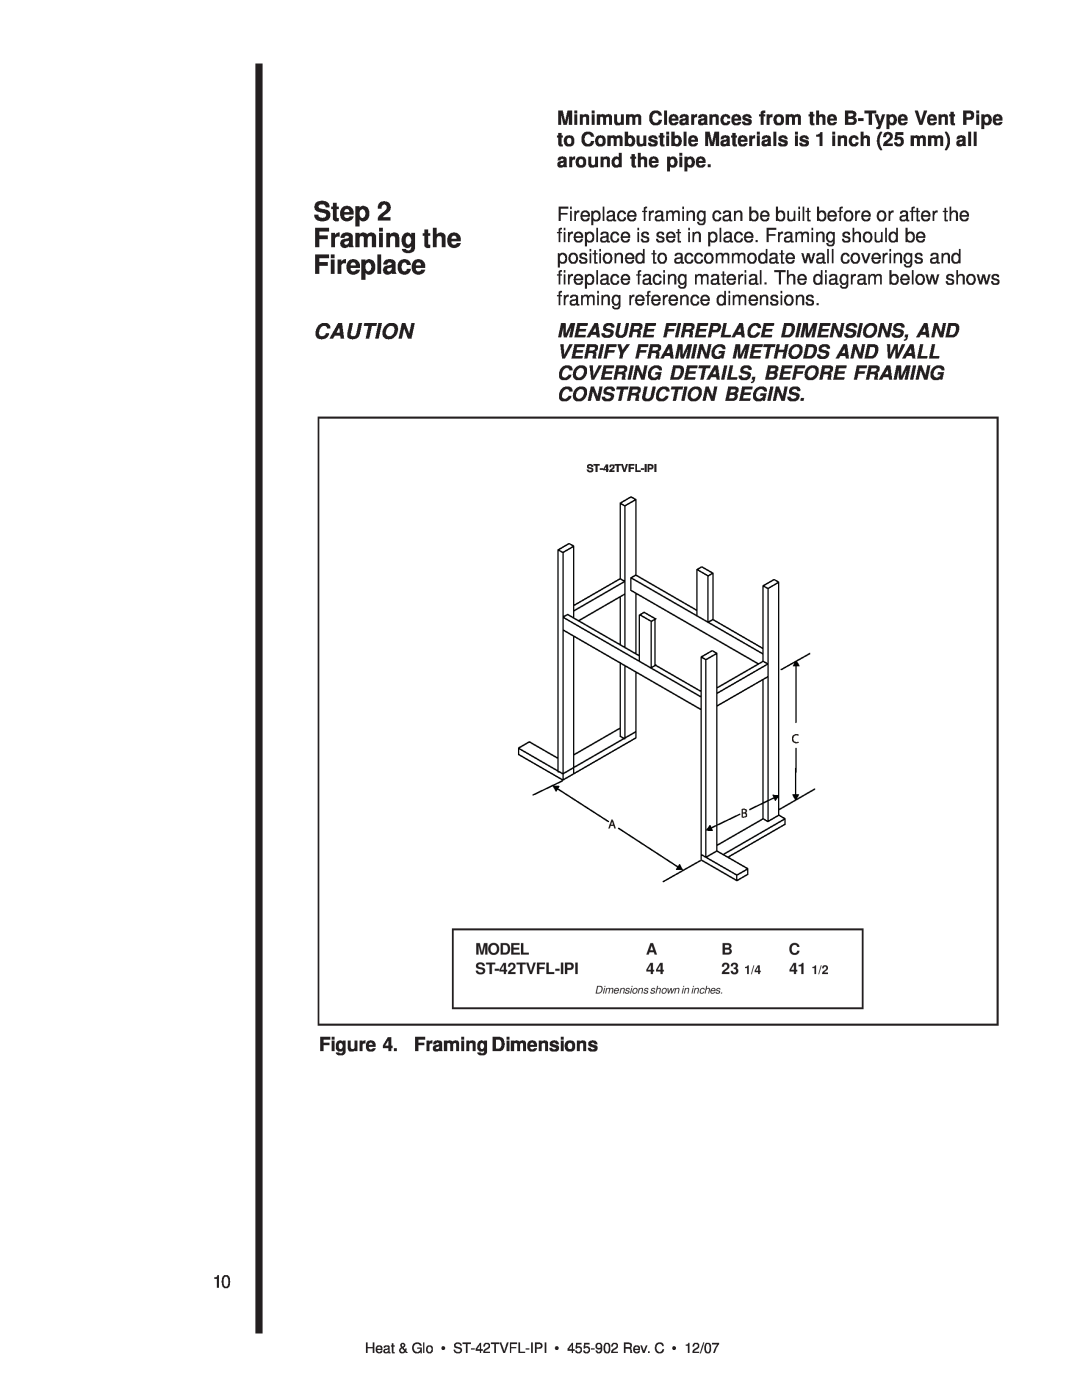 Heat & Glo LifeStyle ST-42TVFL-IPI owner manual Step Framing the Fireplace, Framing Dimensions 